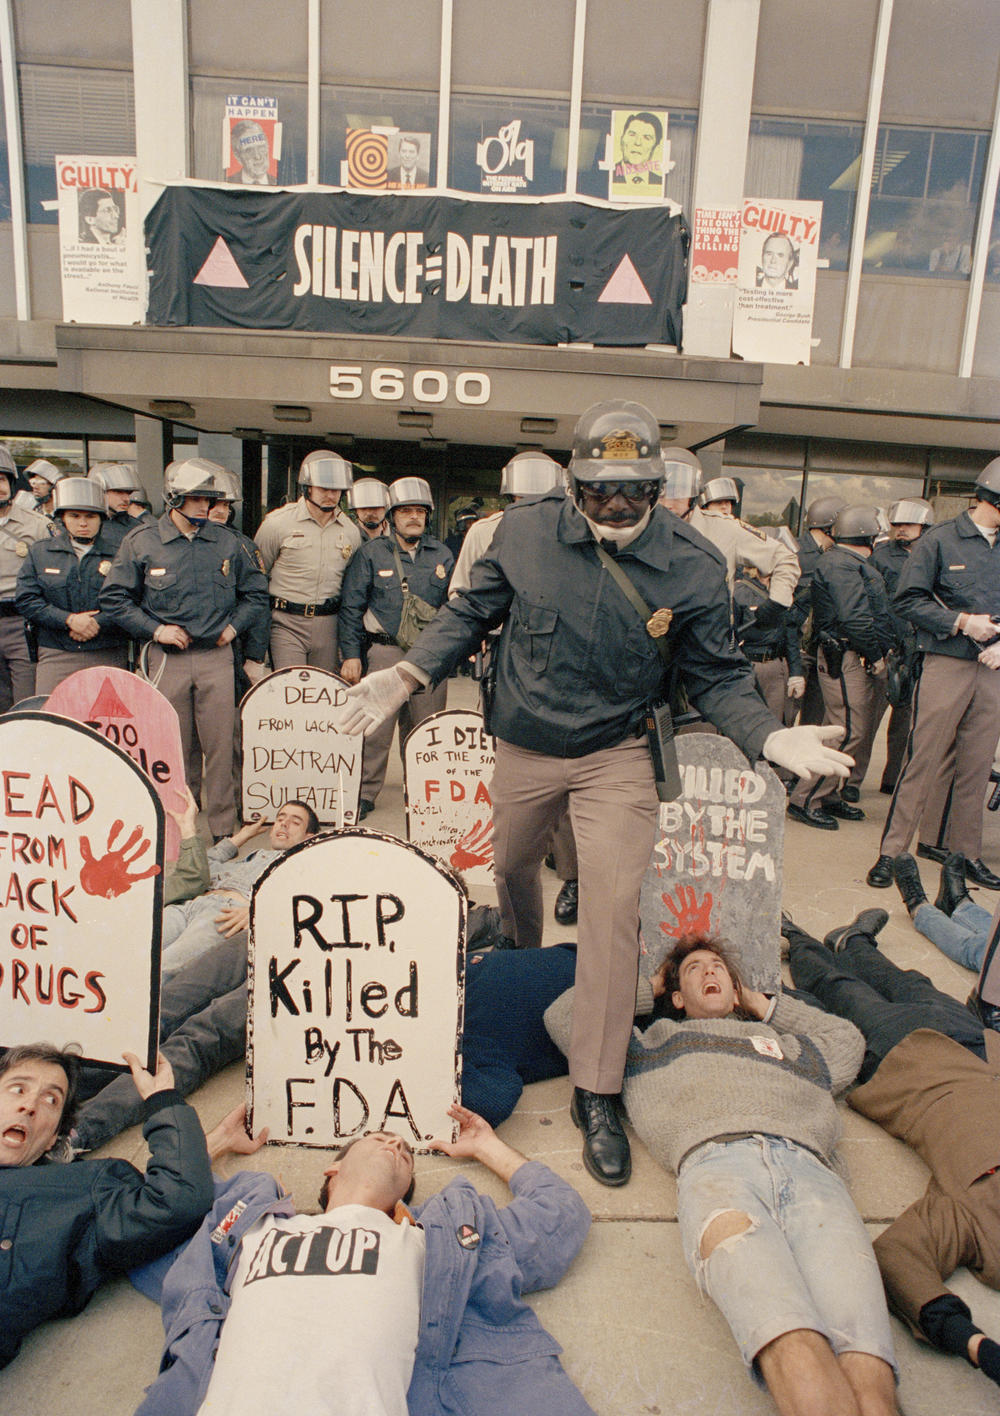 Demonstrators from the organization ACT UP, angry with the federal government's response to the AIDS crisis, protest in front of the headquarters of the Food and Drug Administration in Rockville, Md., Oct. 11, 1988, and effectively shut it down.